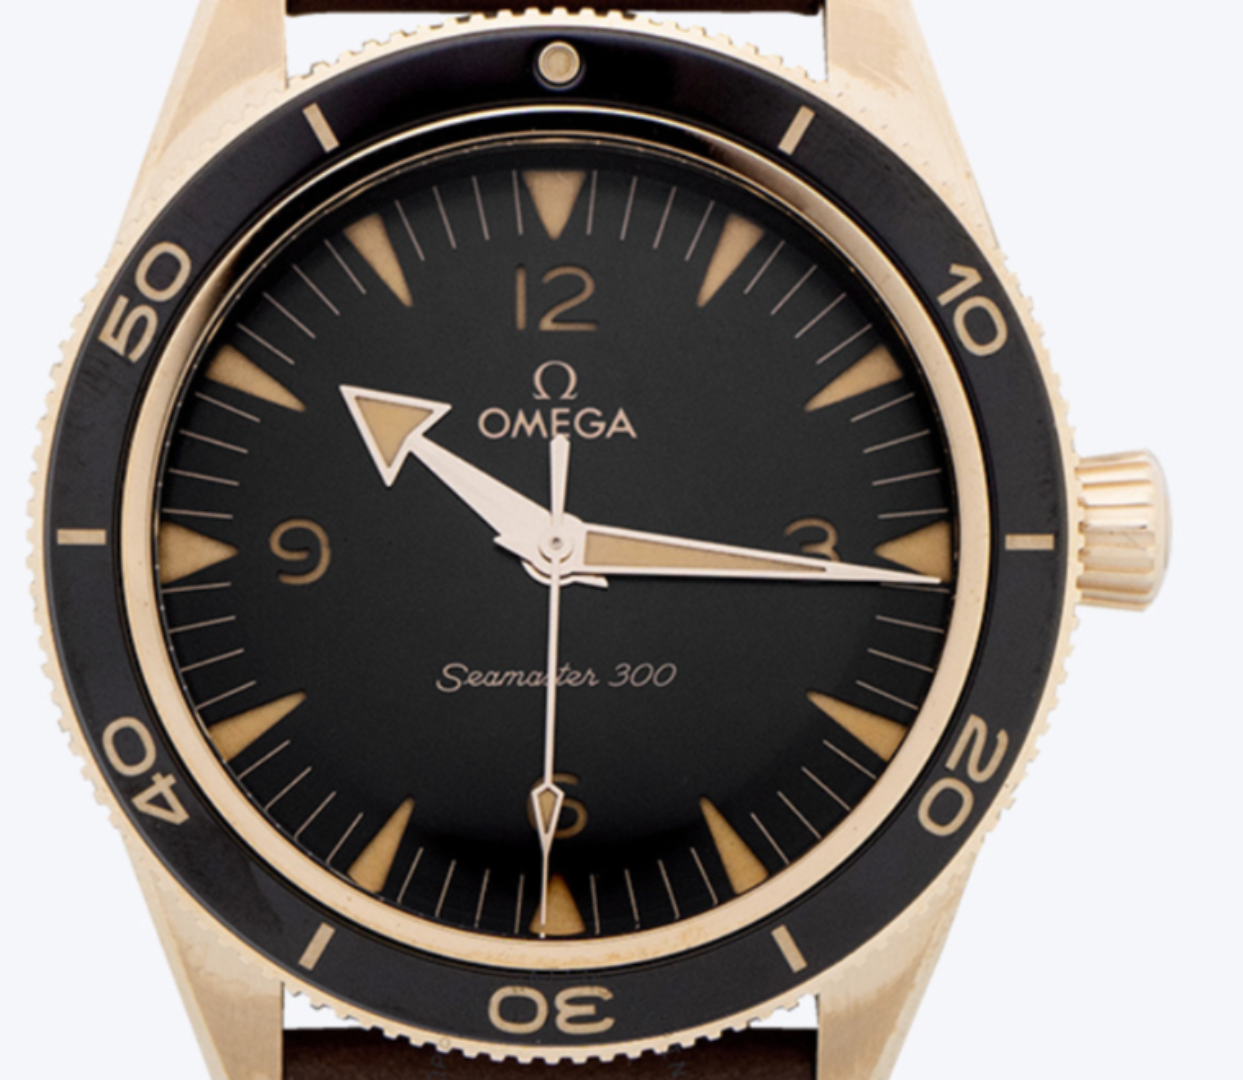 Omega Seamaster 300 Co-Axial 41mm | Mechanical Watch | Harley's Time LLC